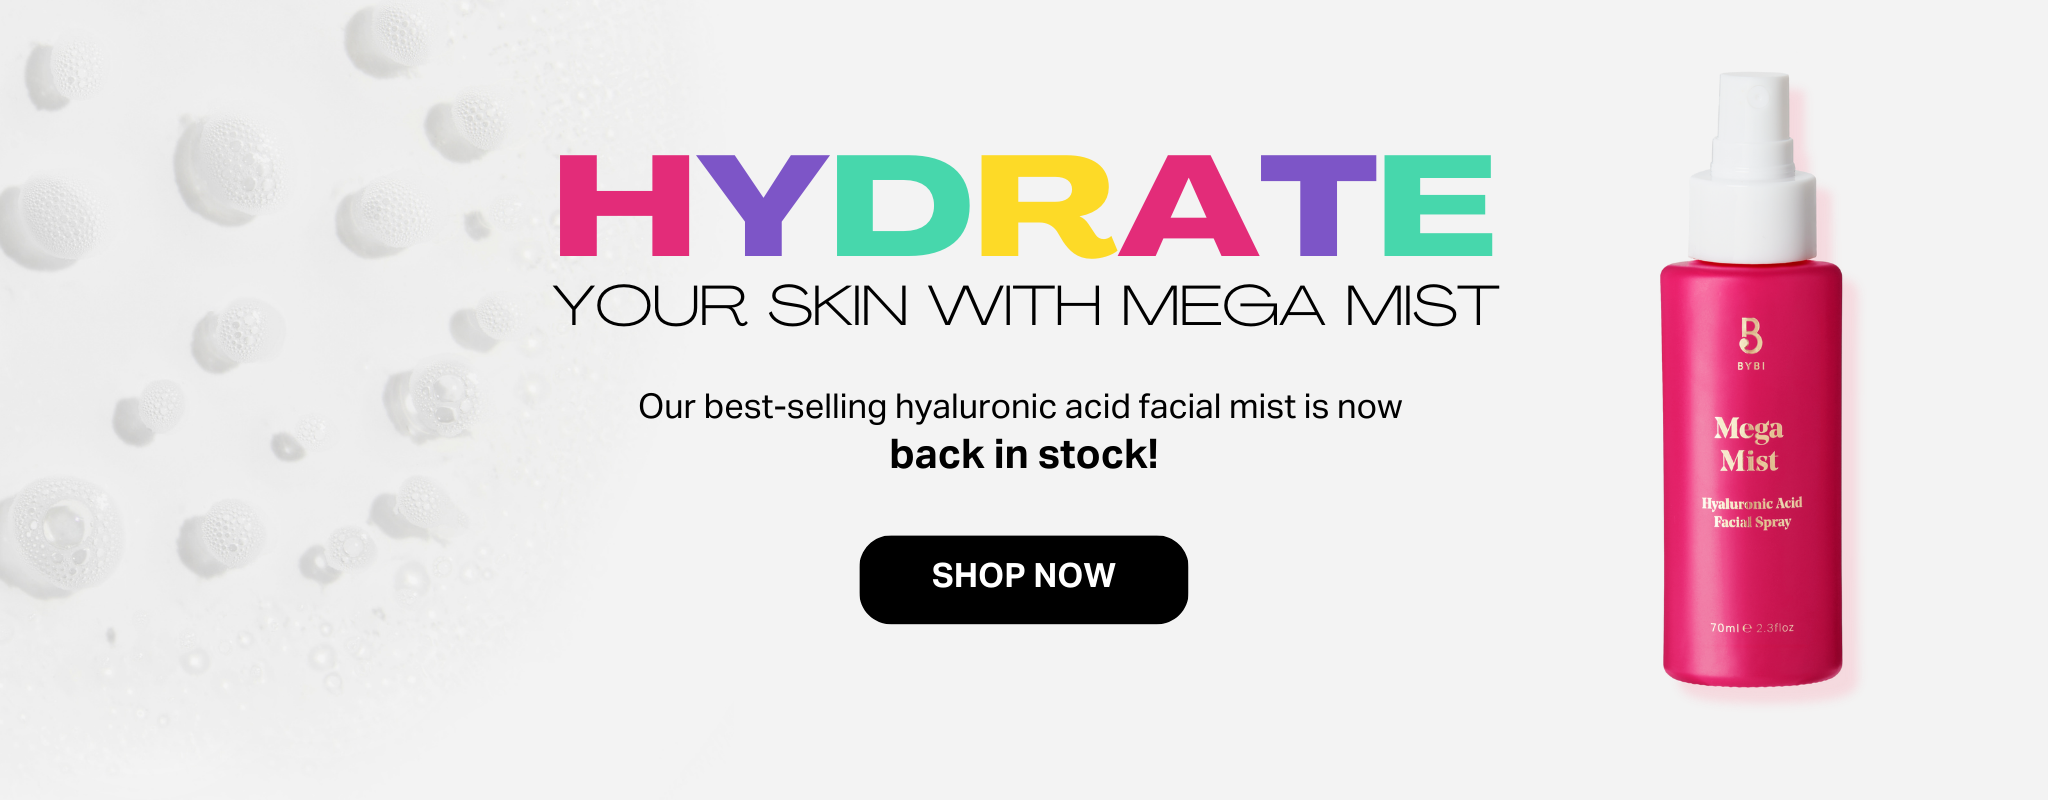 Hydrate your skin with mega mist